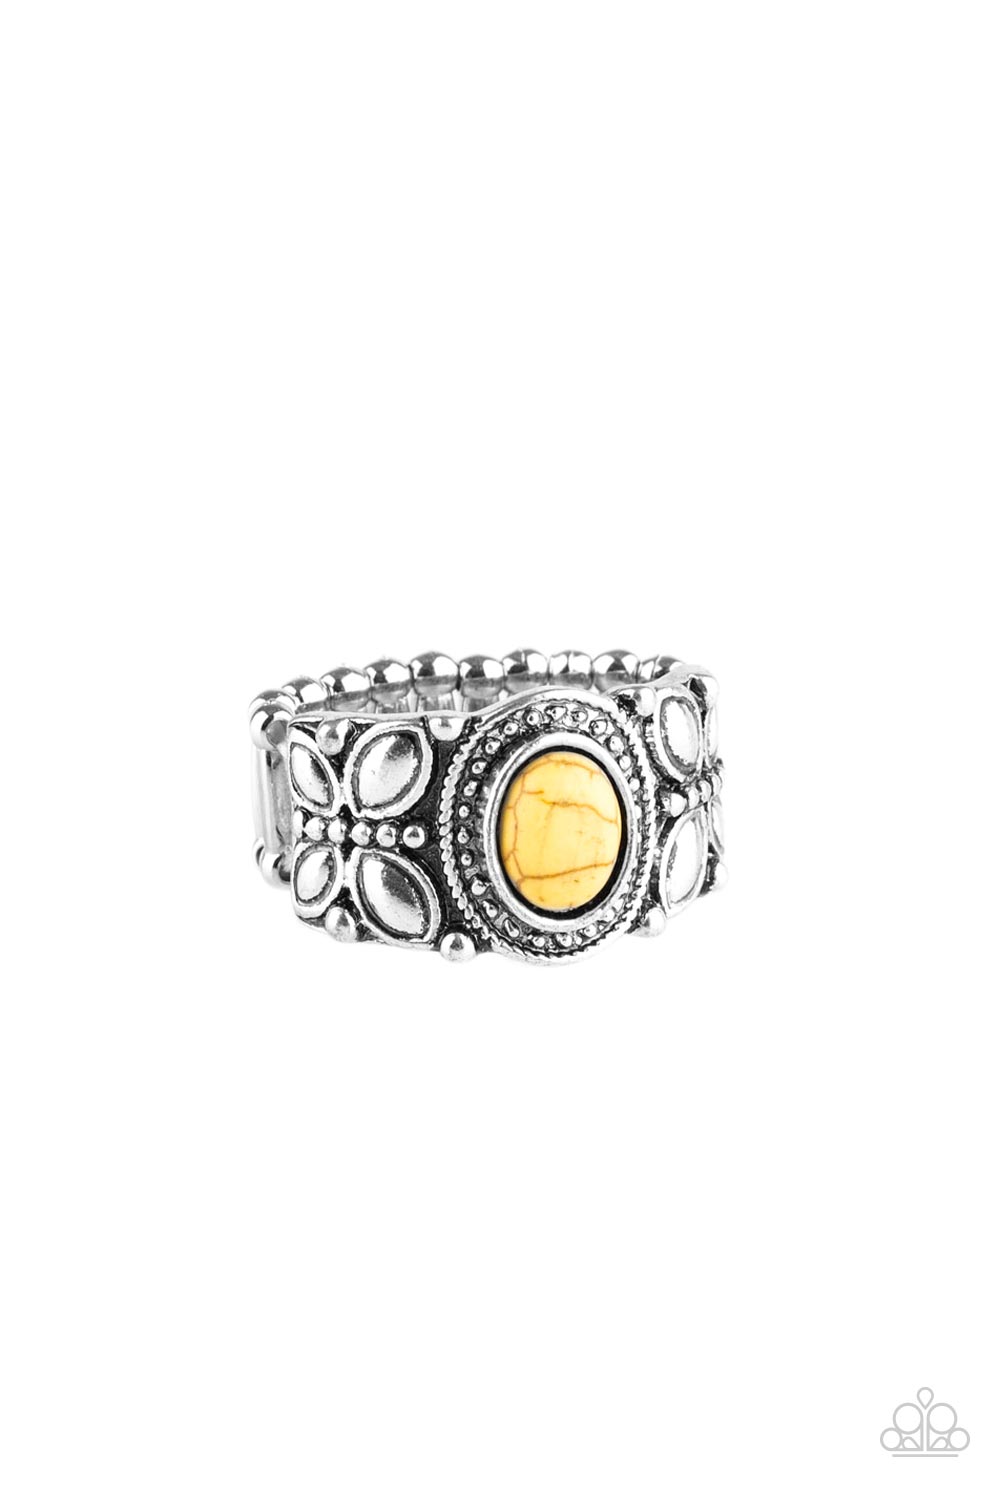 Butterfly Belle Yellow Stone Ring - Paparazzi Accessories